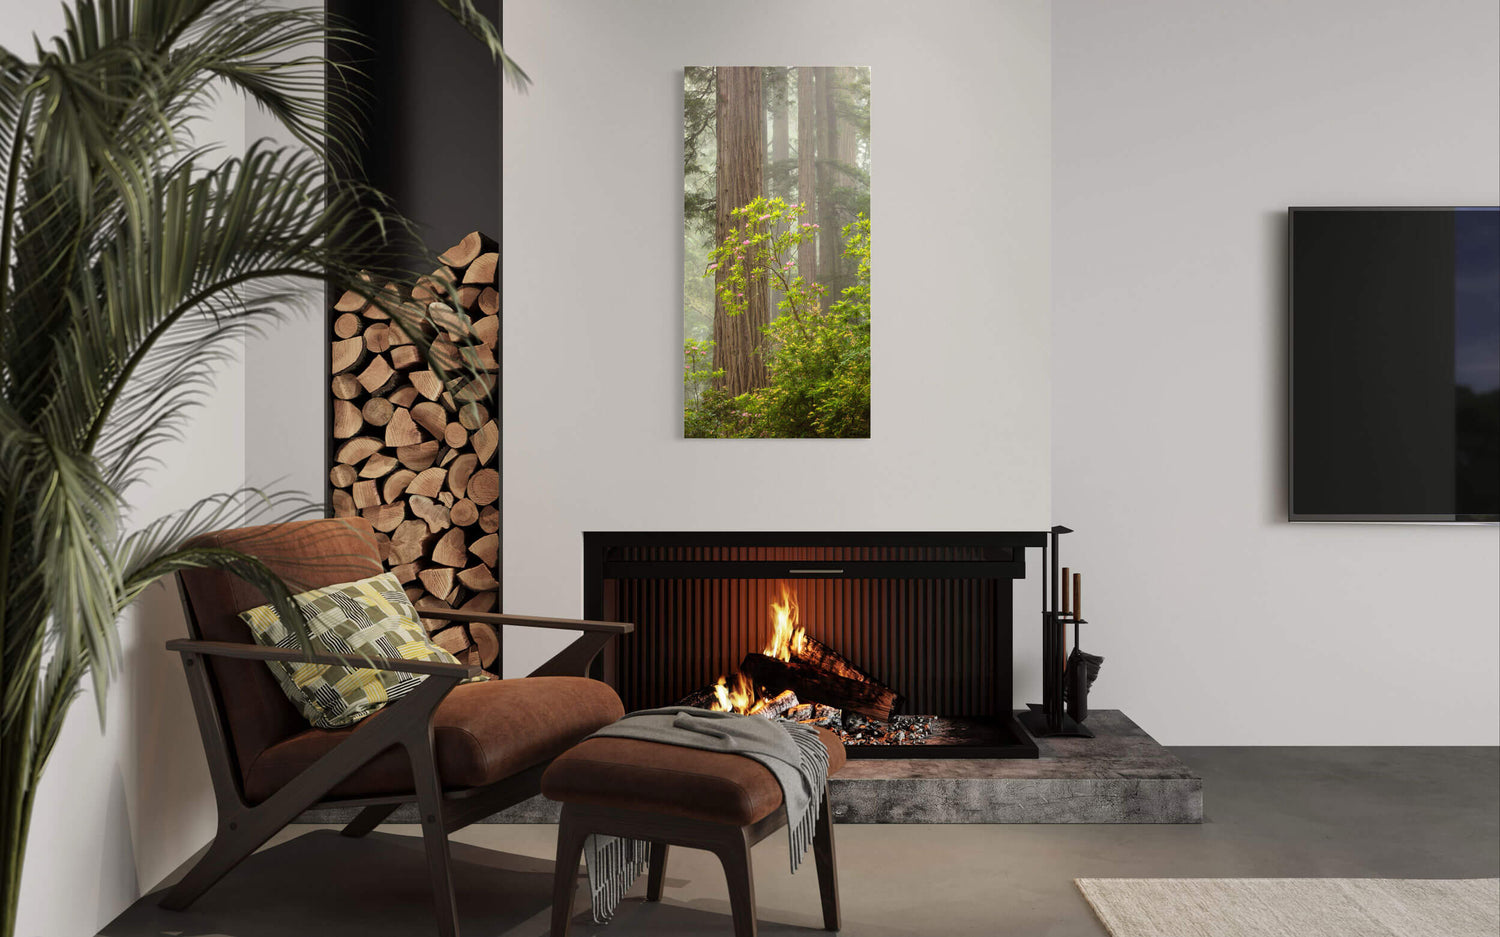 A California redwoods picture of the blooming rhododendron hangs in a living room.